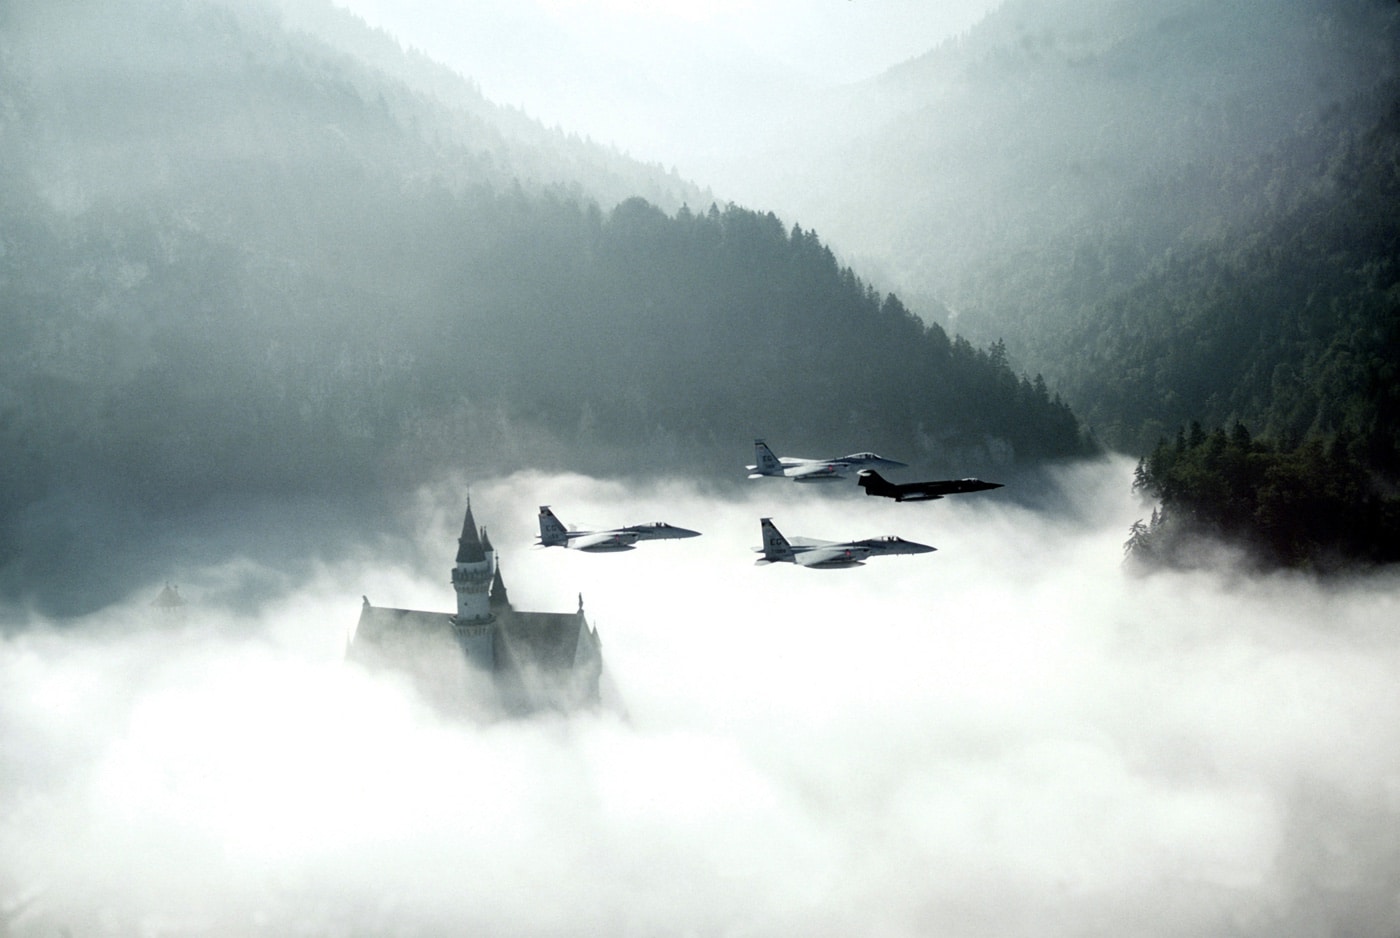 In this photograph, a German Air Force F-104 Starfighter leads a flight of three U.S. F-15 Eagles past Neuschwanstein Castle during REFORGER '82.